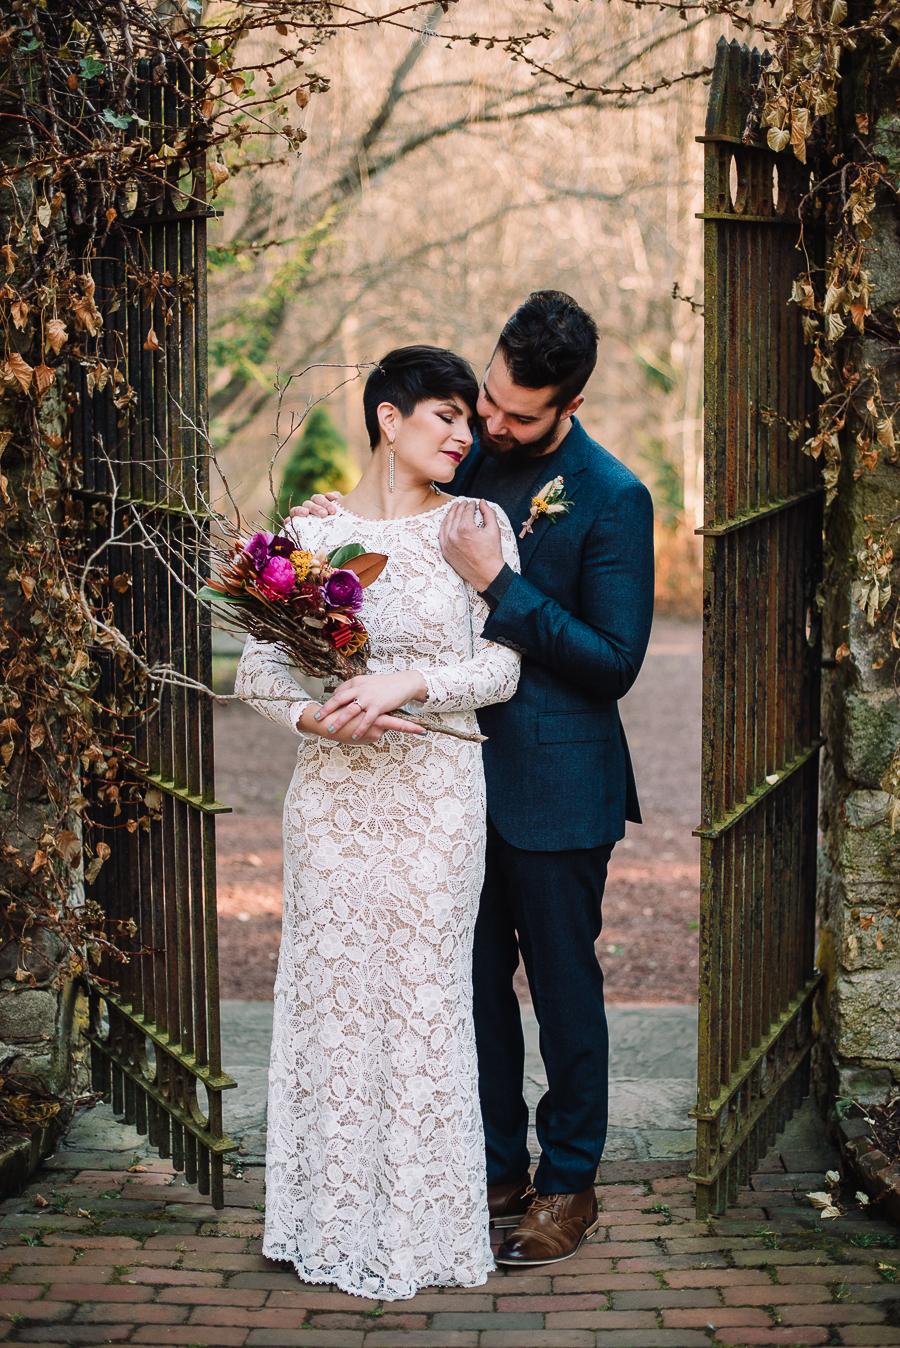 Winter Microwedding at HollyHedge Estate Nina Lily Photography Philly In Love Philadelphia Weddings Philadelphia Wedding Vendors